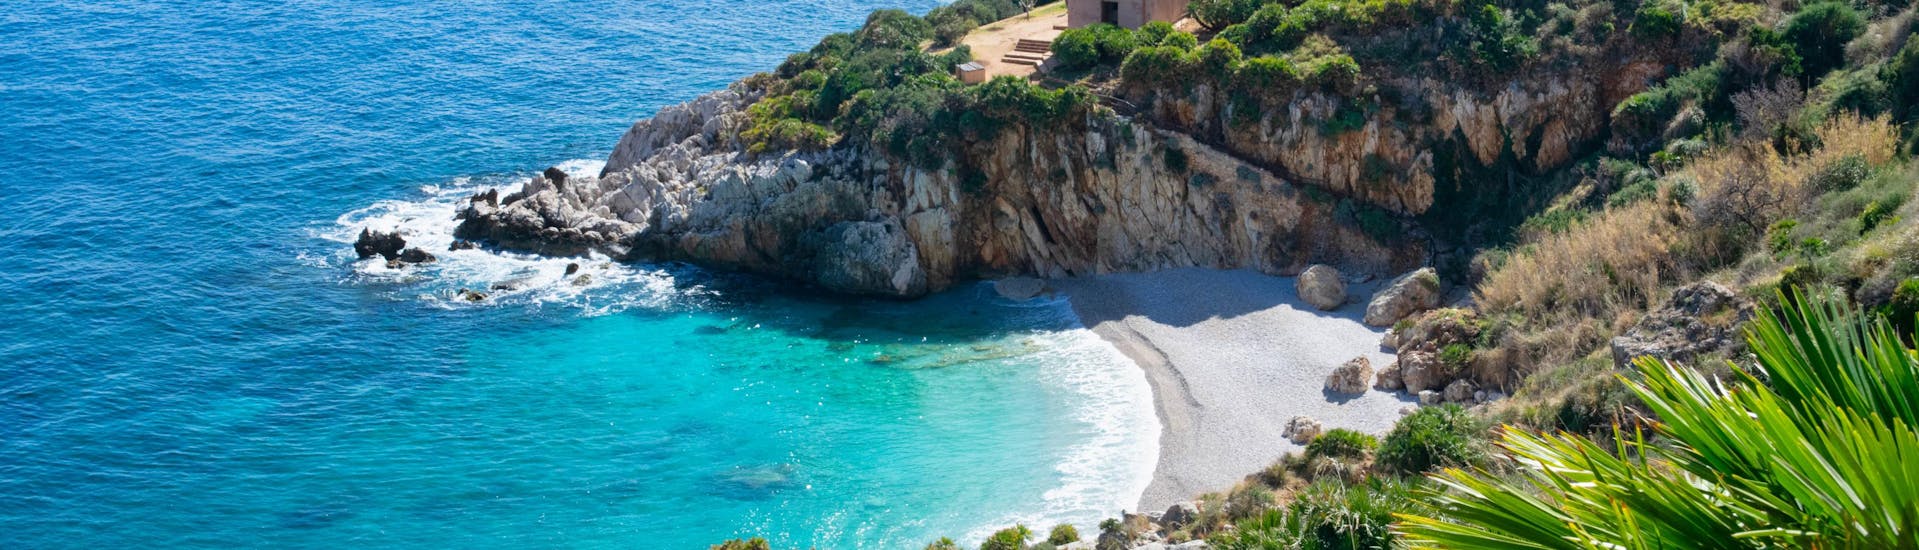 View of the Cala dell'Uzzo, a beautiful beach that you can see on a boat trip to the Riserva Naturale dello Zingaro.